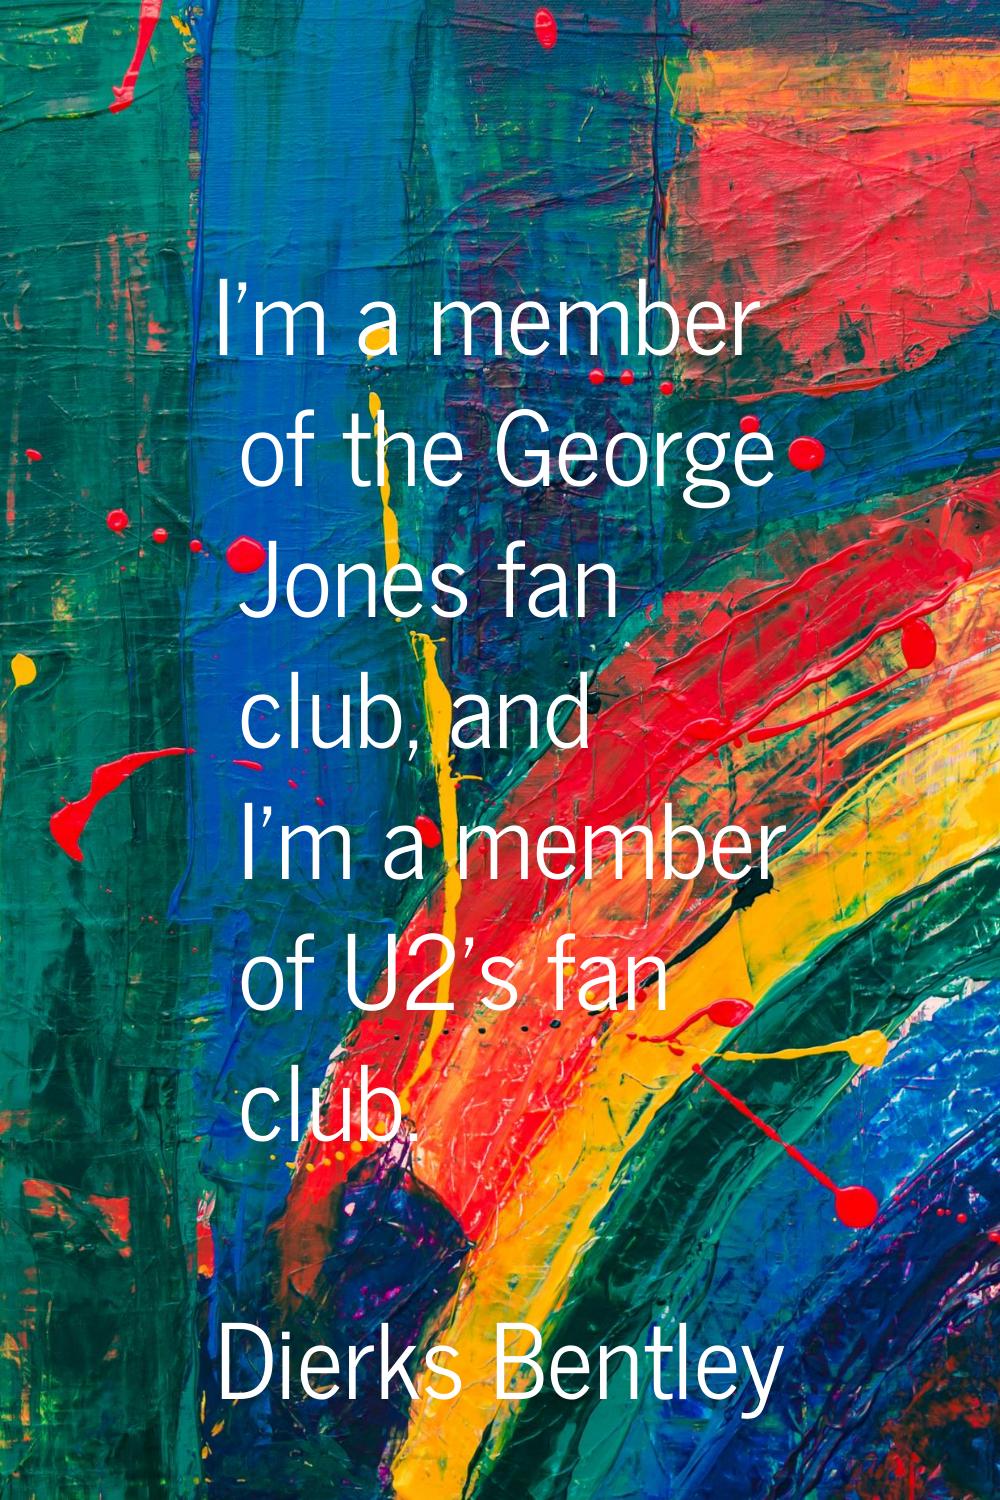 I'm a member of the George Jones fan club, and I'm a member of U2's fan club.